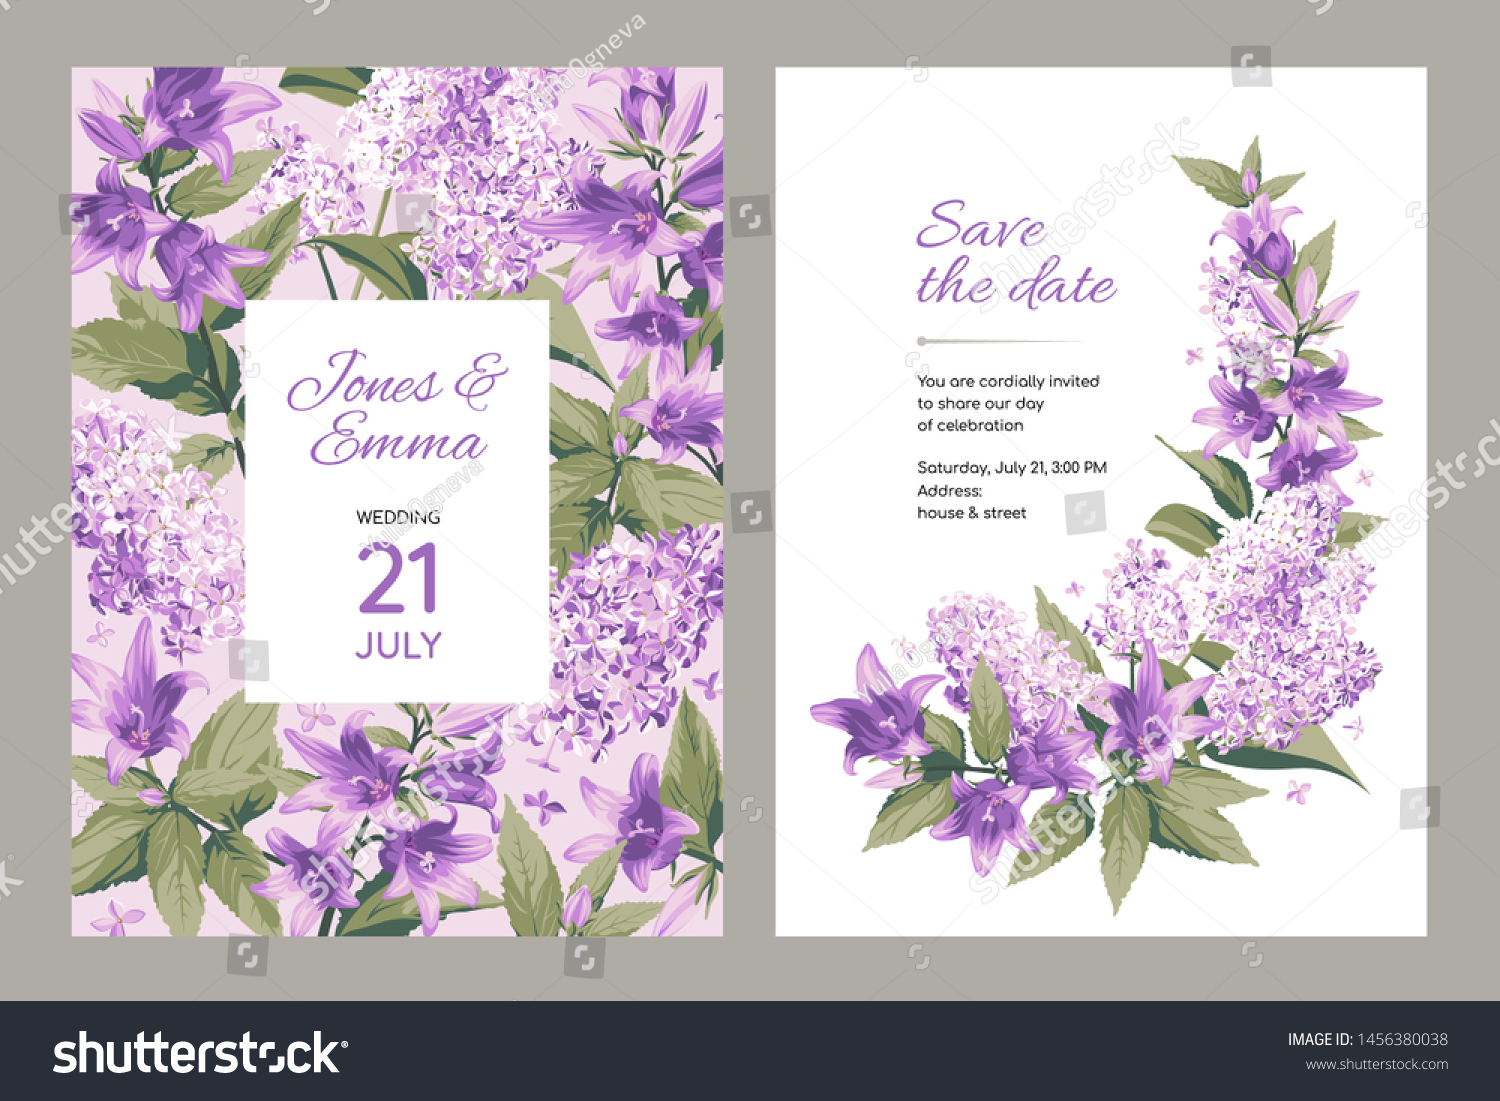 SVG of Wedding invitation card. Frame with text and flowers - purple Campanula and Lilac on light and white Background. svg